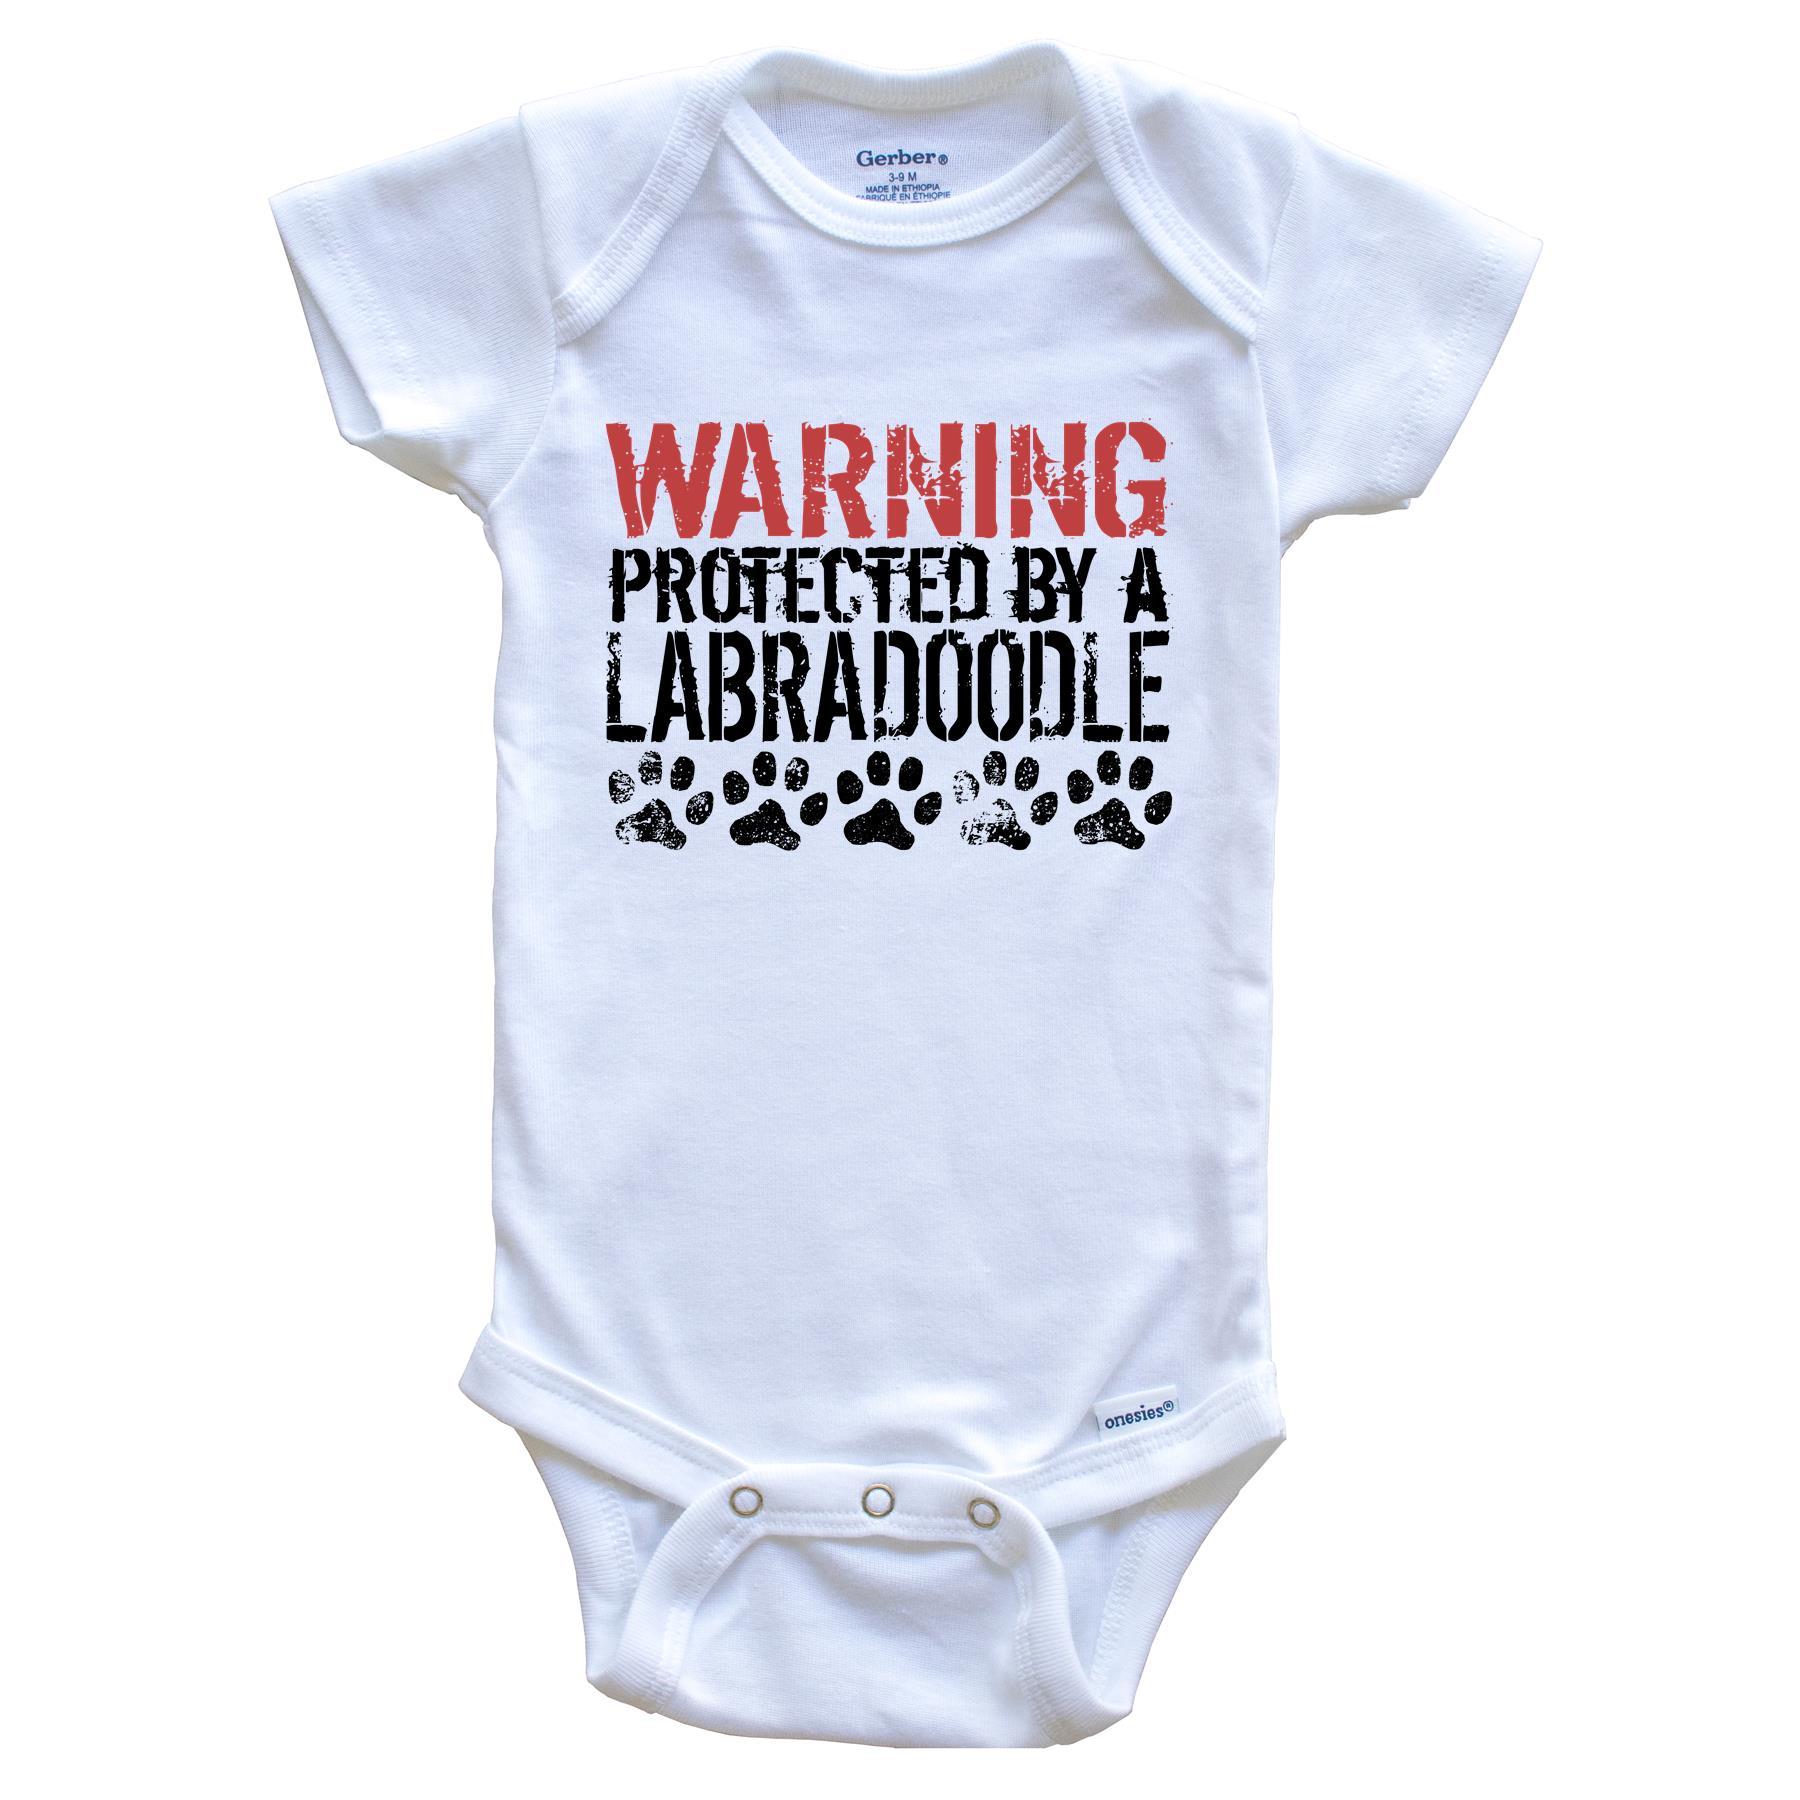 Warning Protected By A Labradoodle Baby Onesie